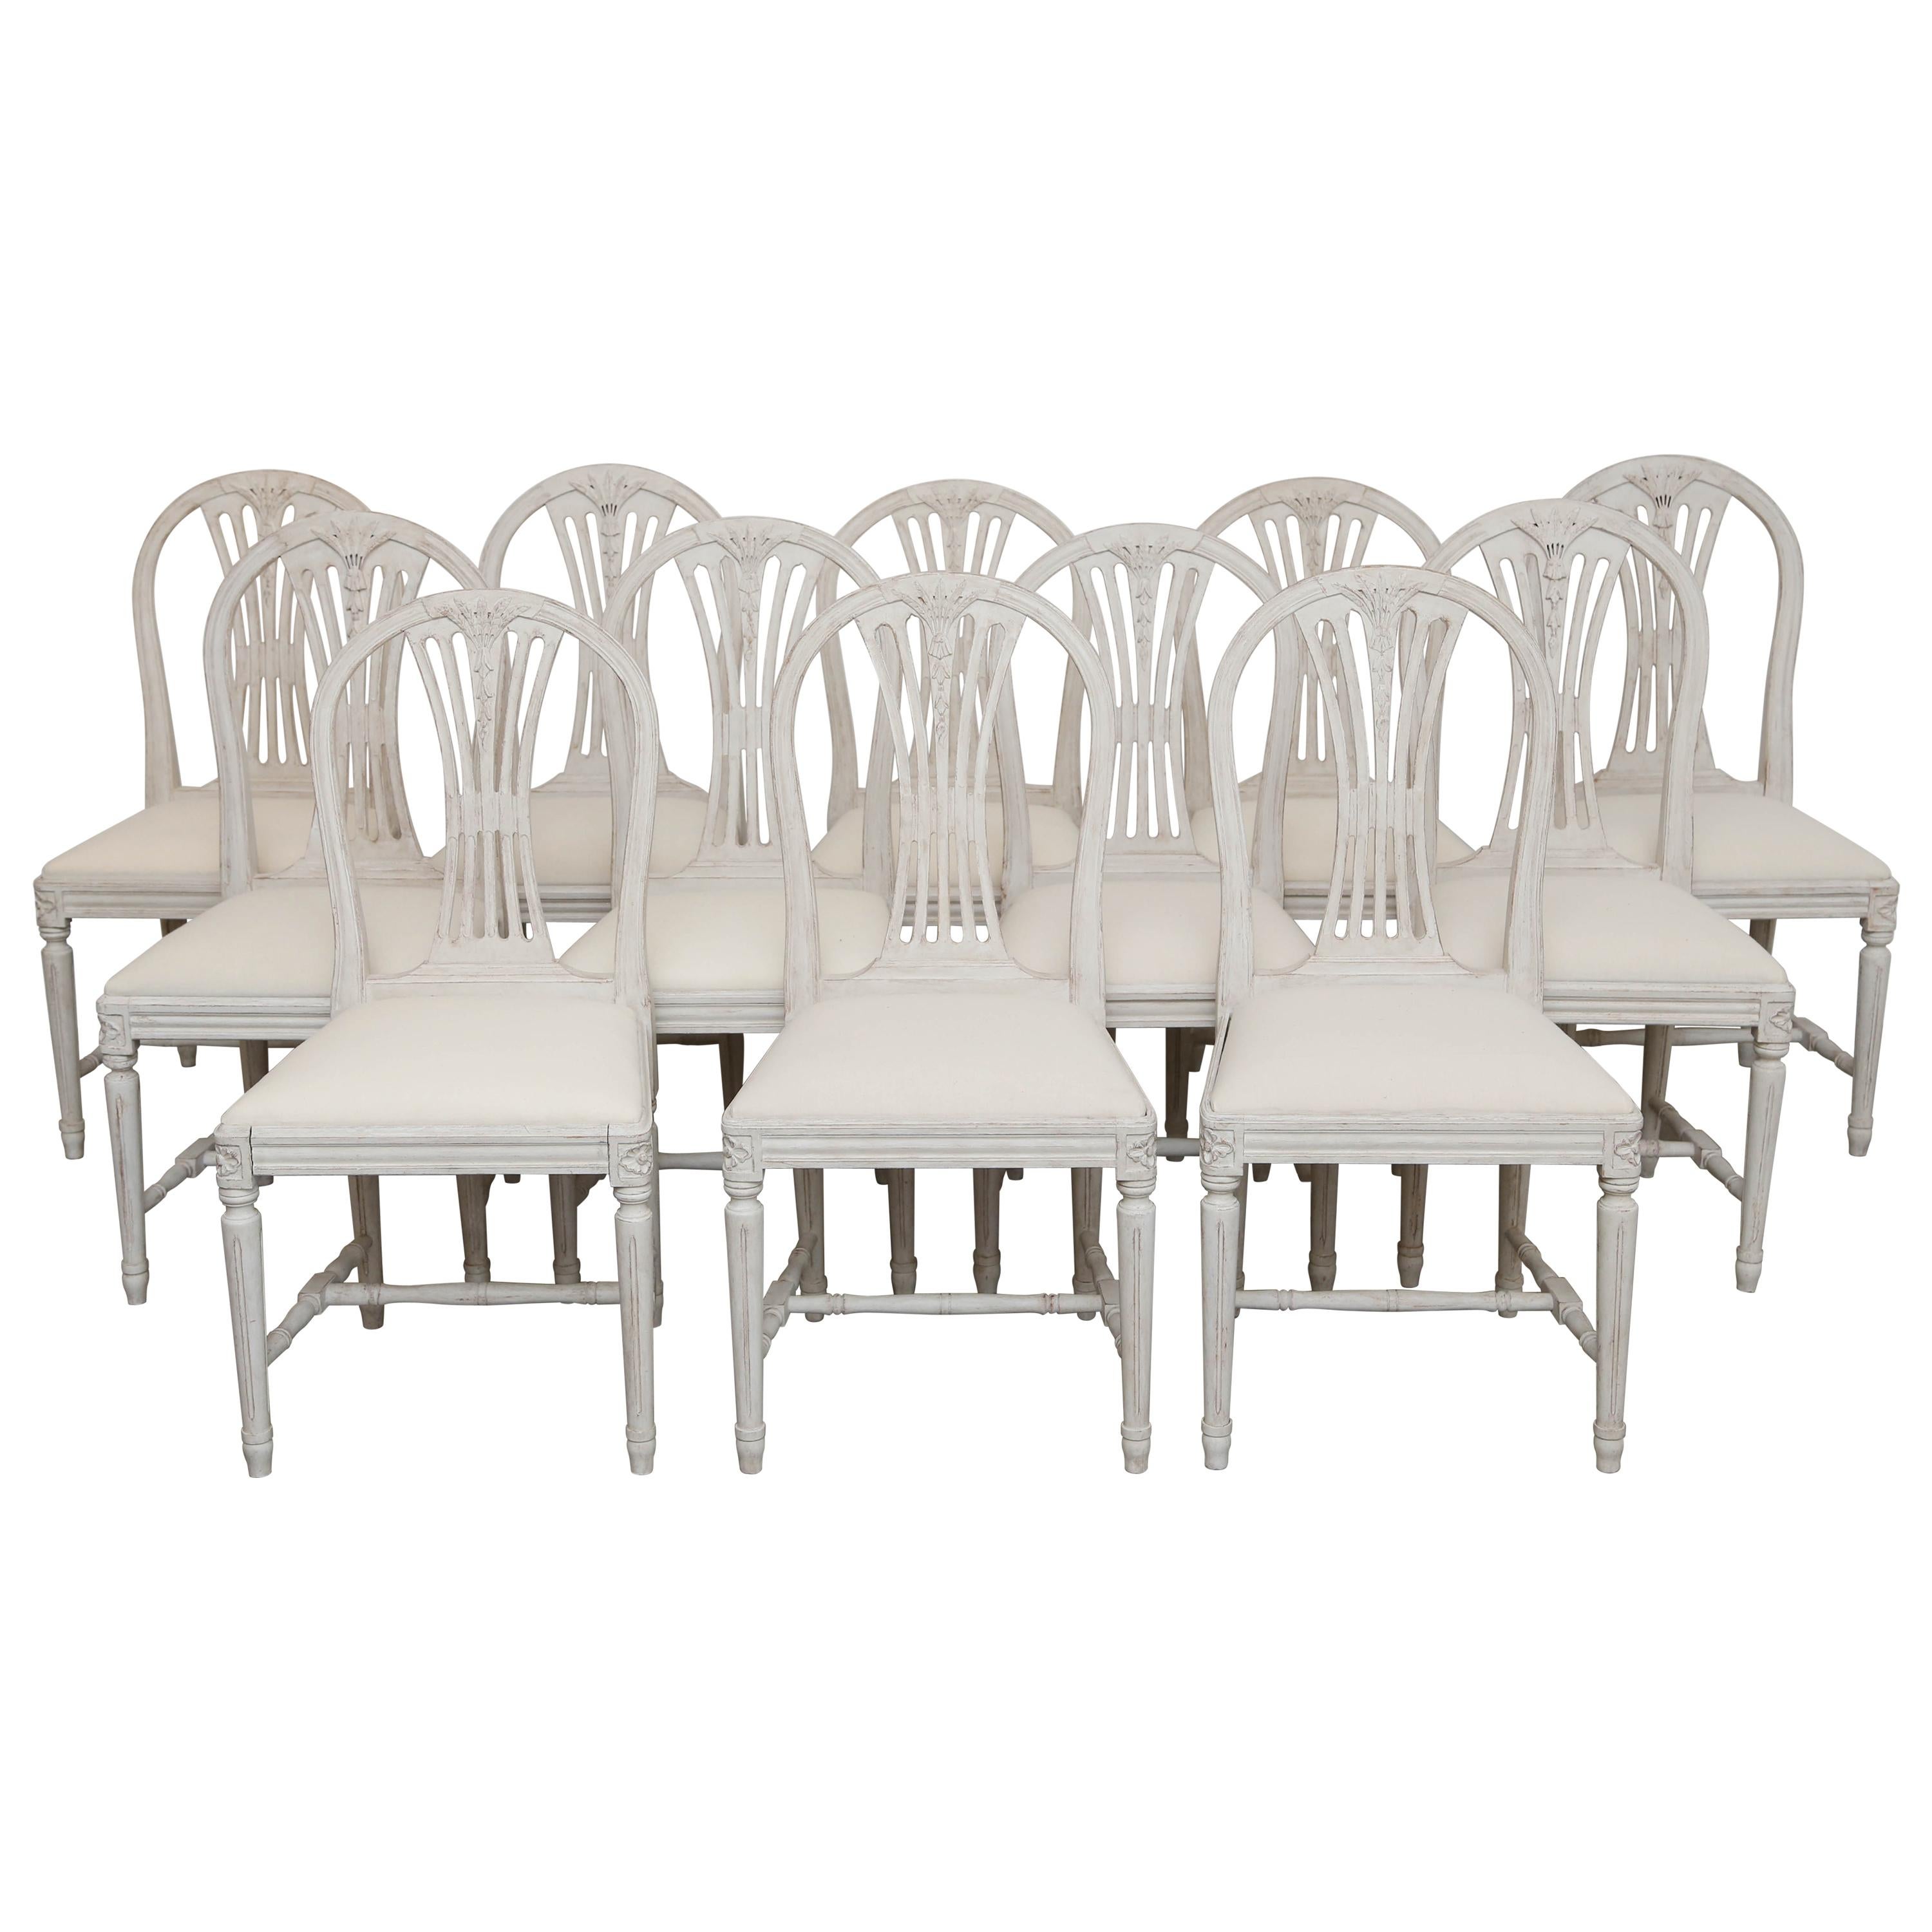 Set of 12 Antique Painted Gustavian Style Dining Chairs Early 20th Century